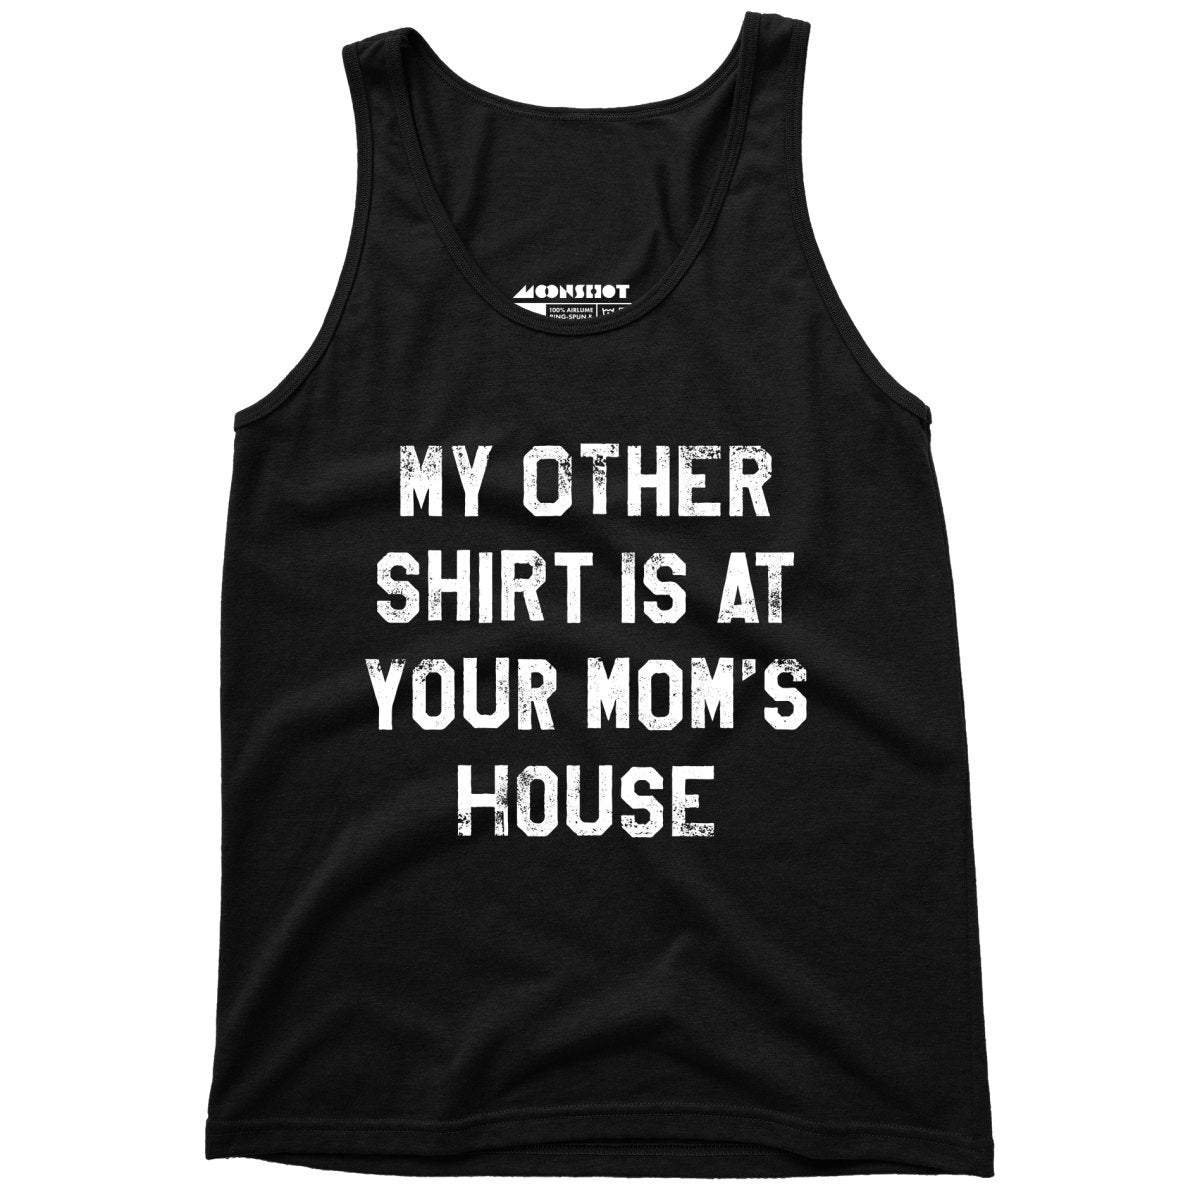 My Other Shirt Is At Your Mom's House - Unisex Tank Top